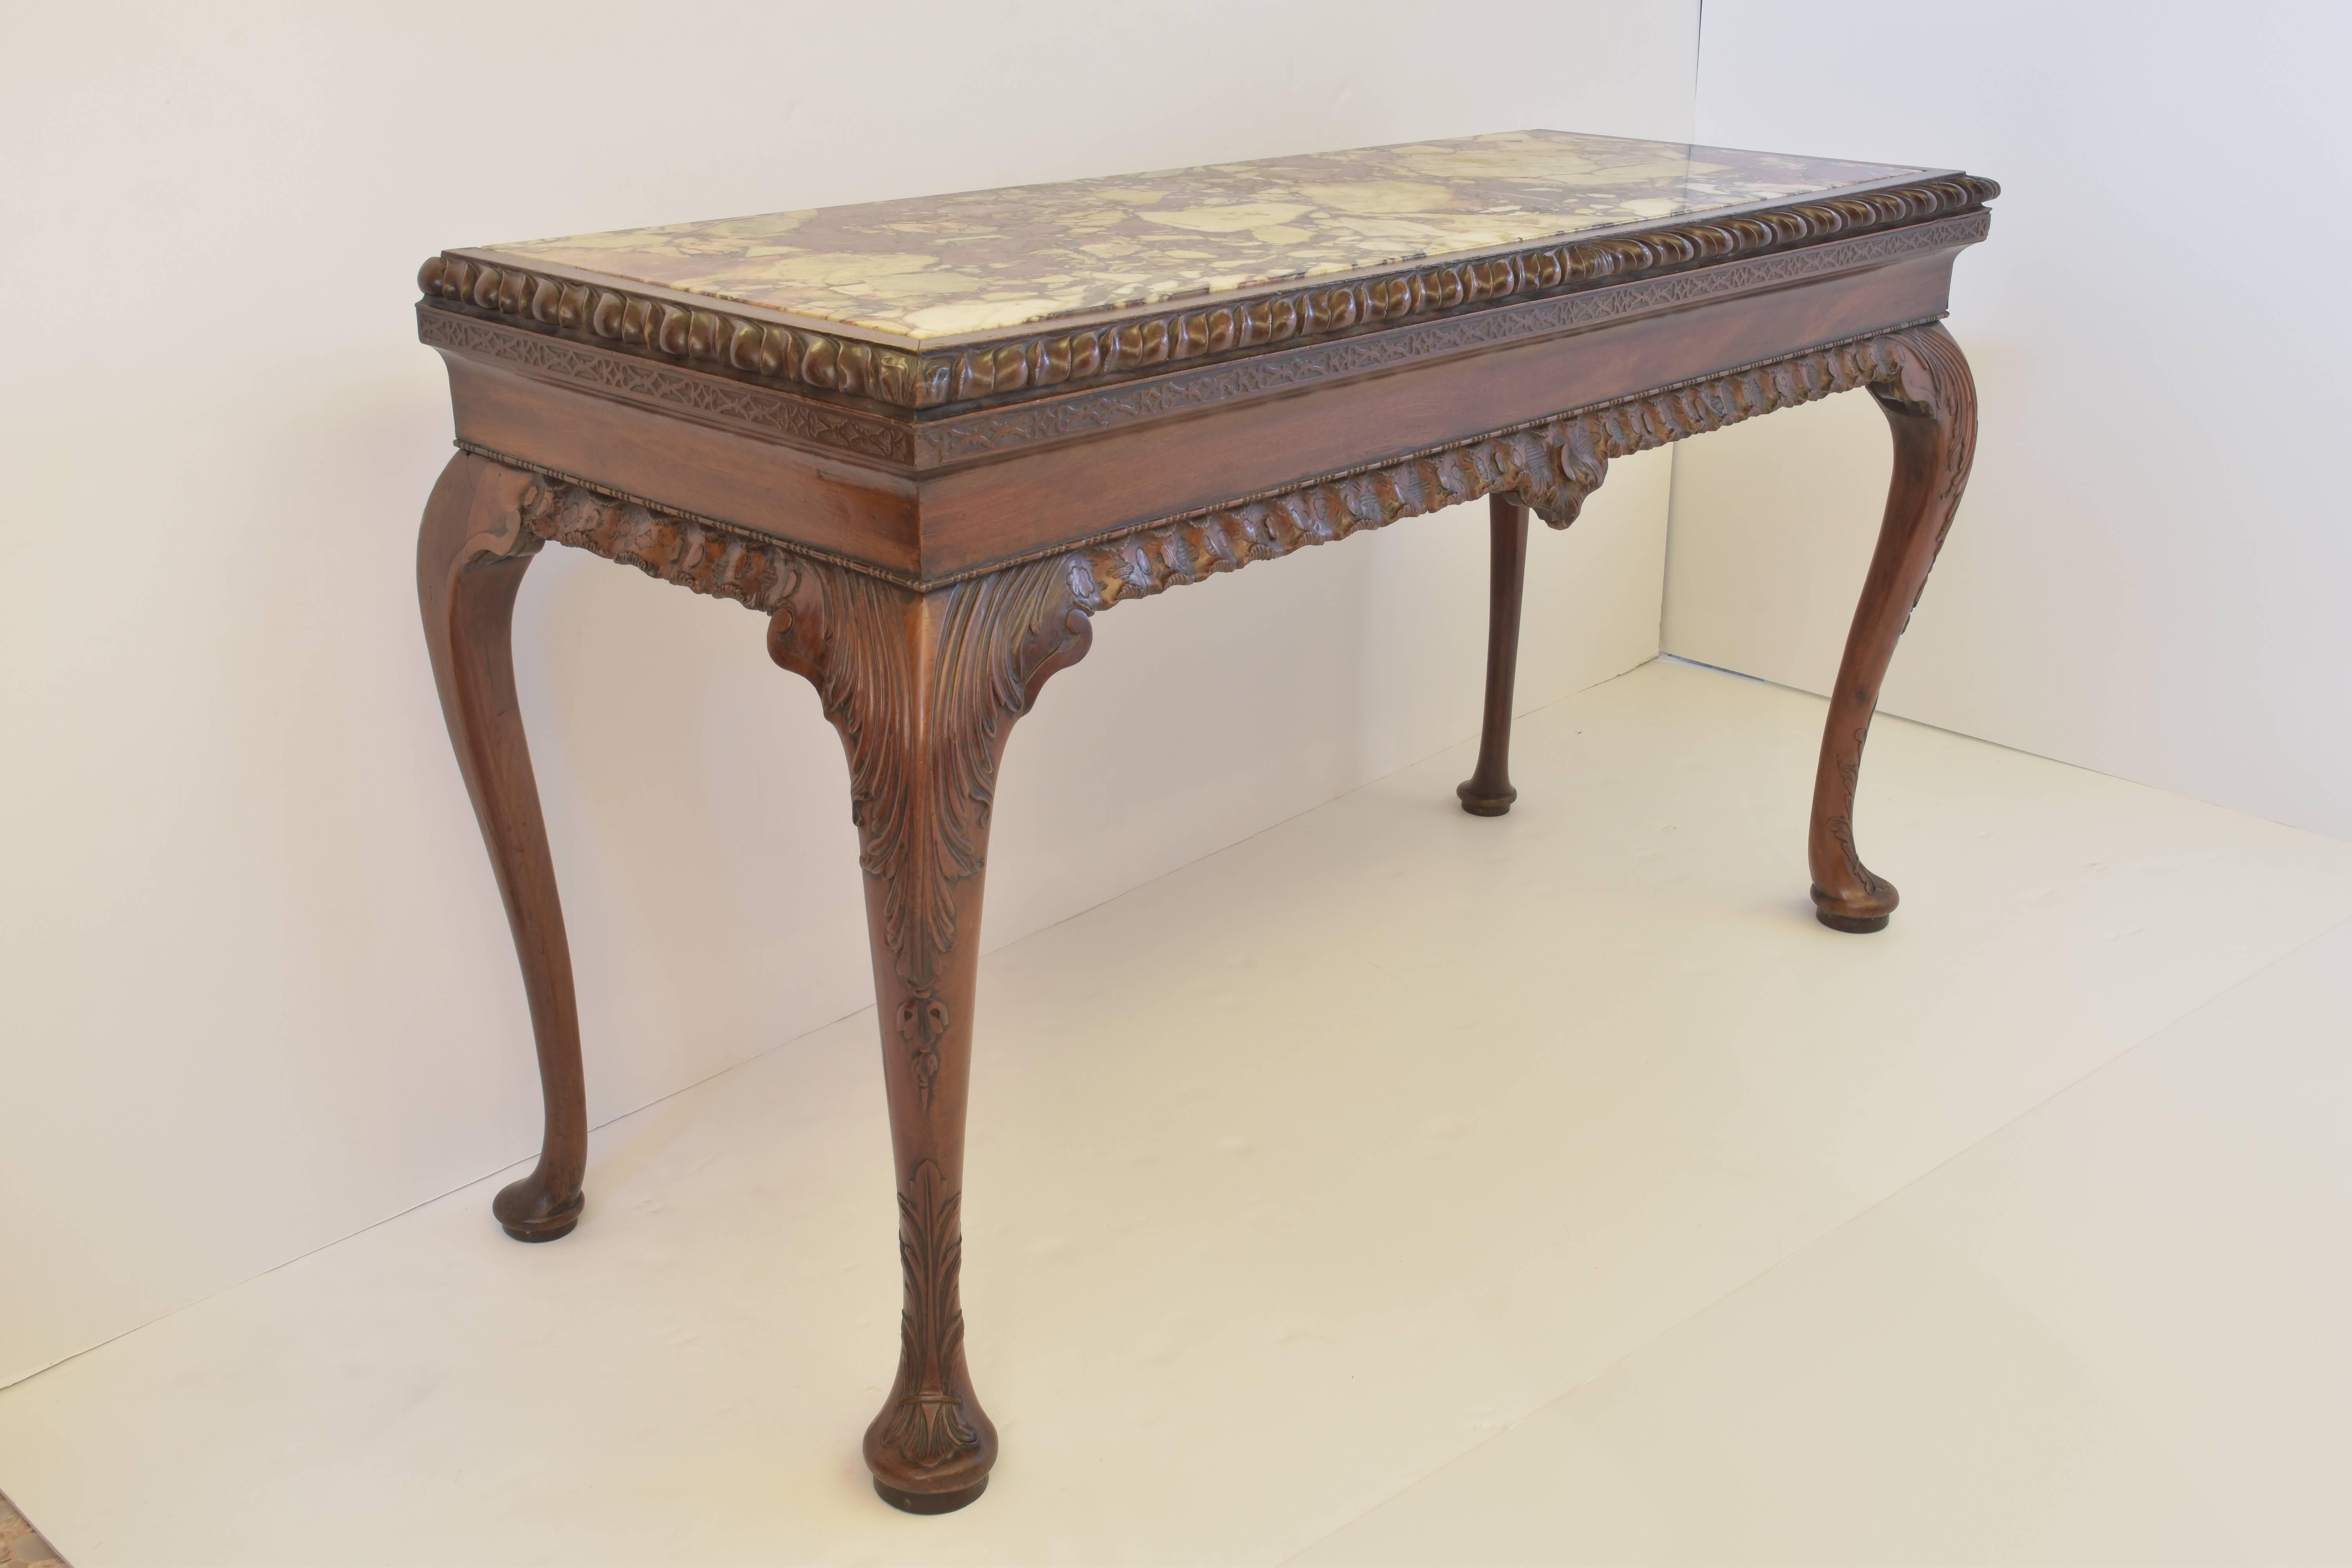 Exquisite antique Irish George I style carved mahogany and Breche marble side table. The top inset with a Breche Violette marble pane, framed by a gadroon border with blind fret carved frieze. The apron carved with ruffled cabochons and rock work,